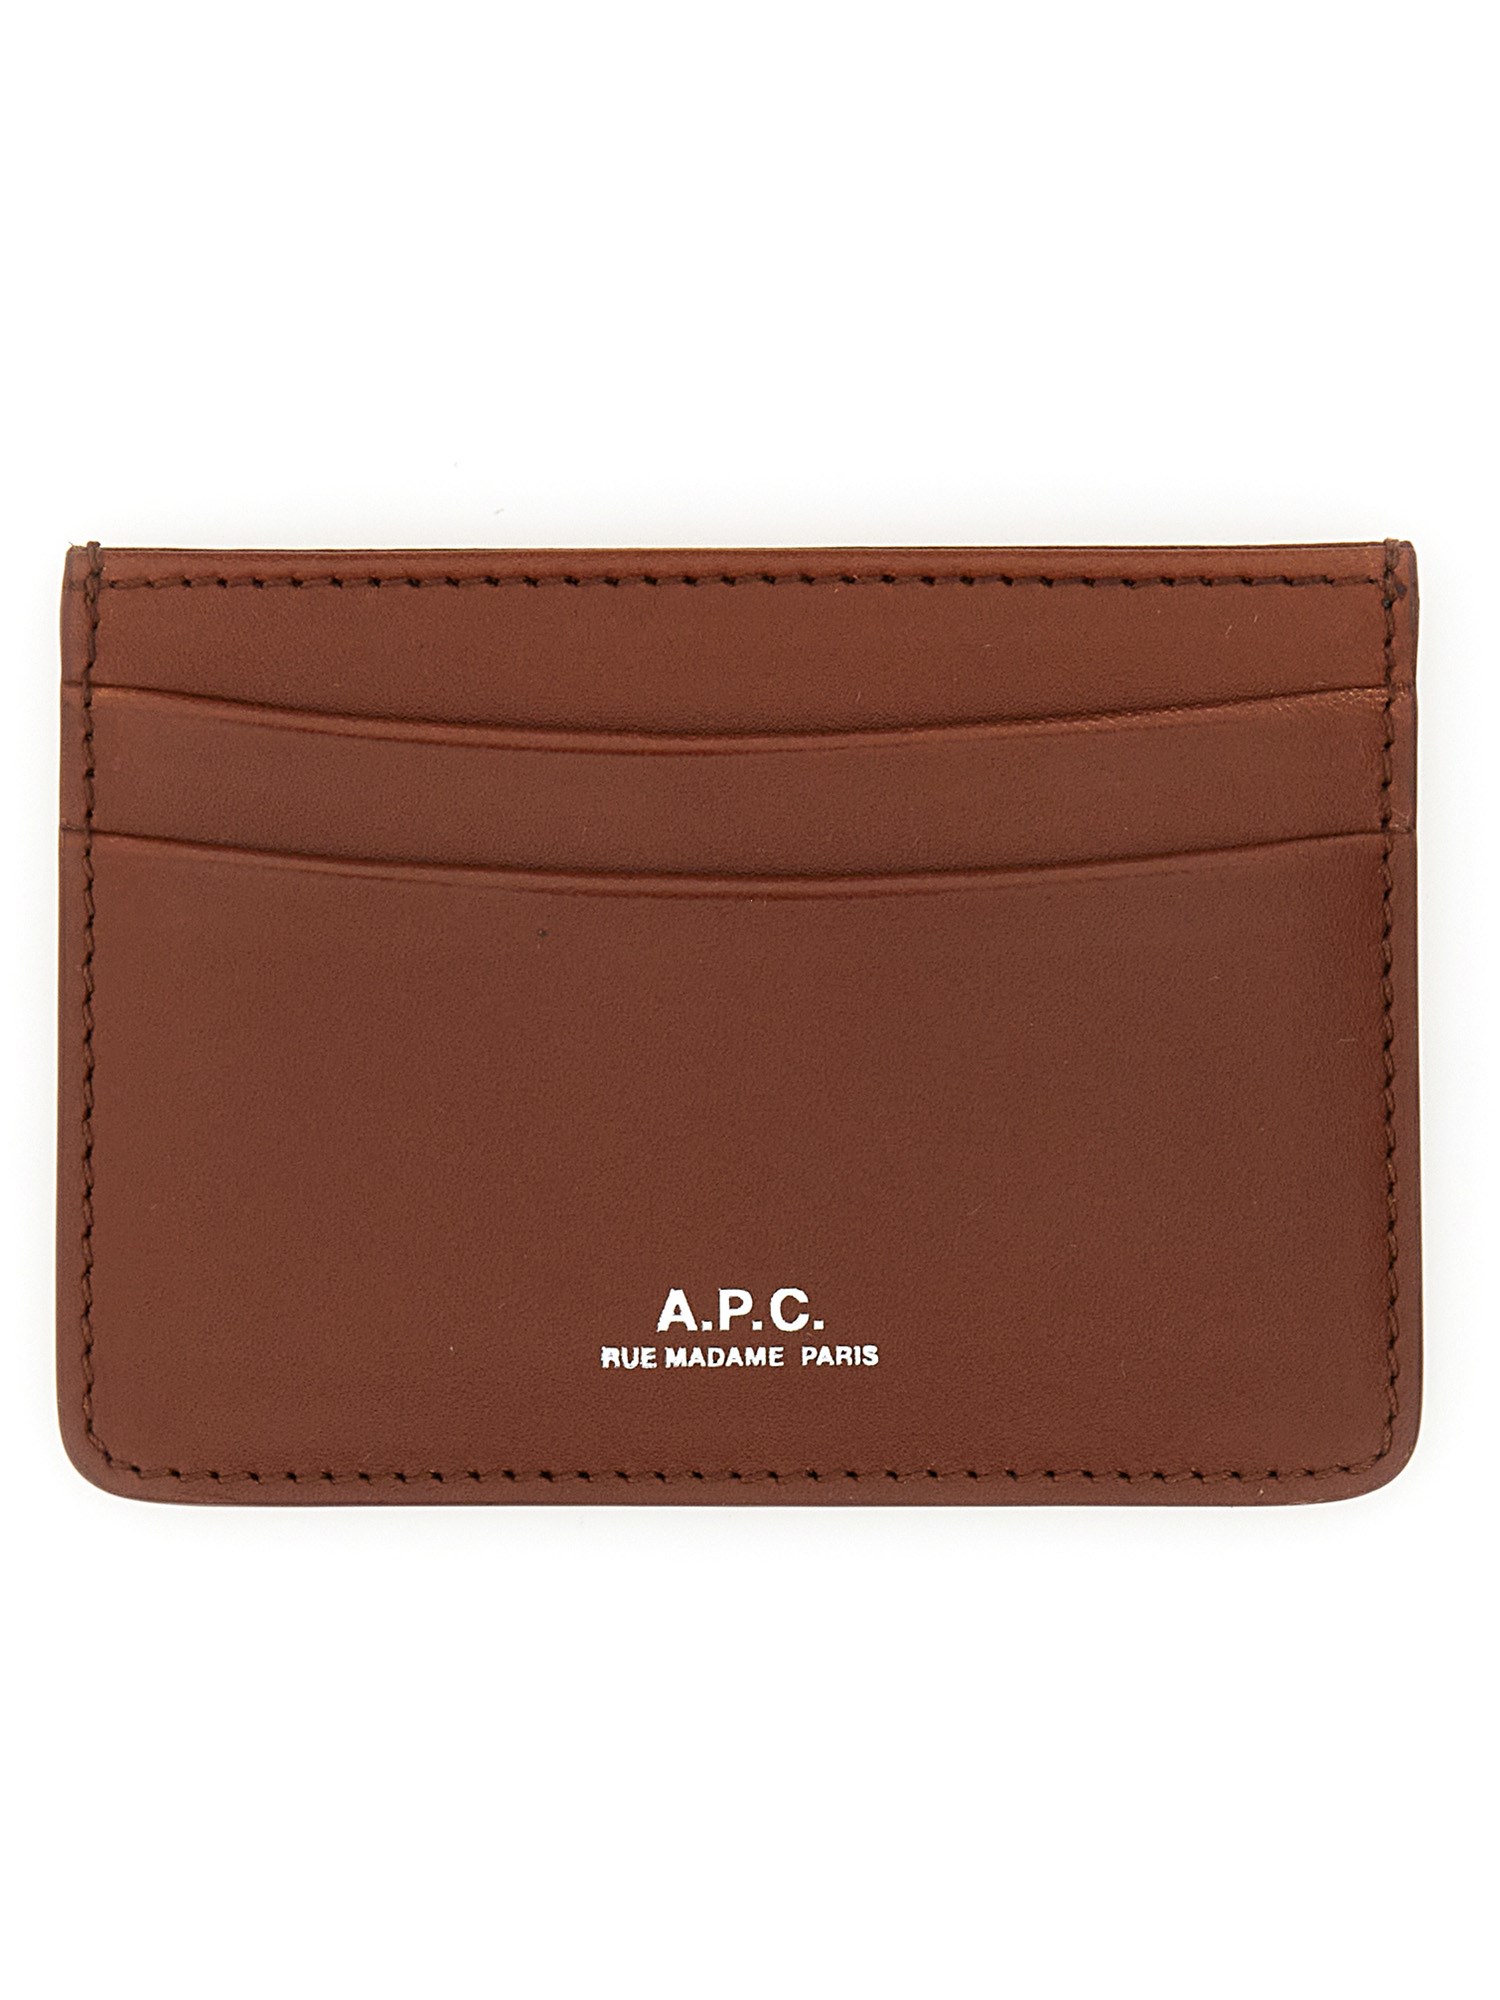 a.p.c. leather key ring